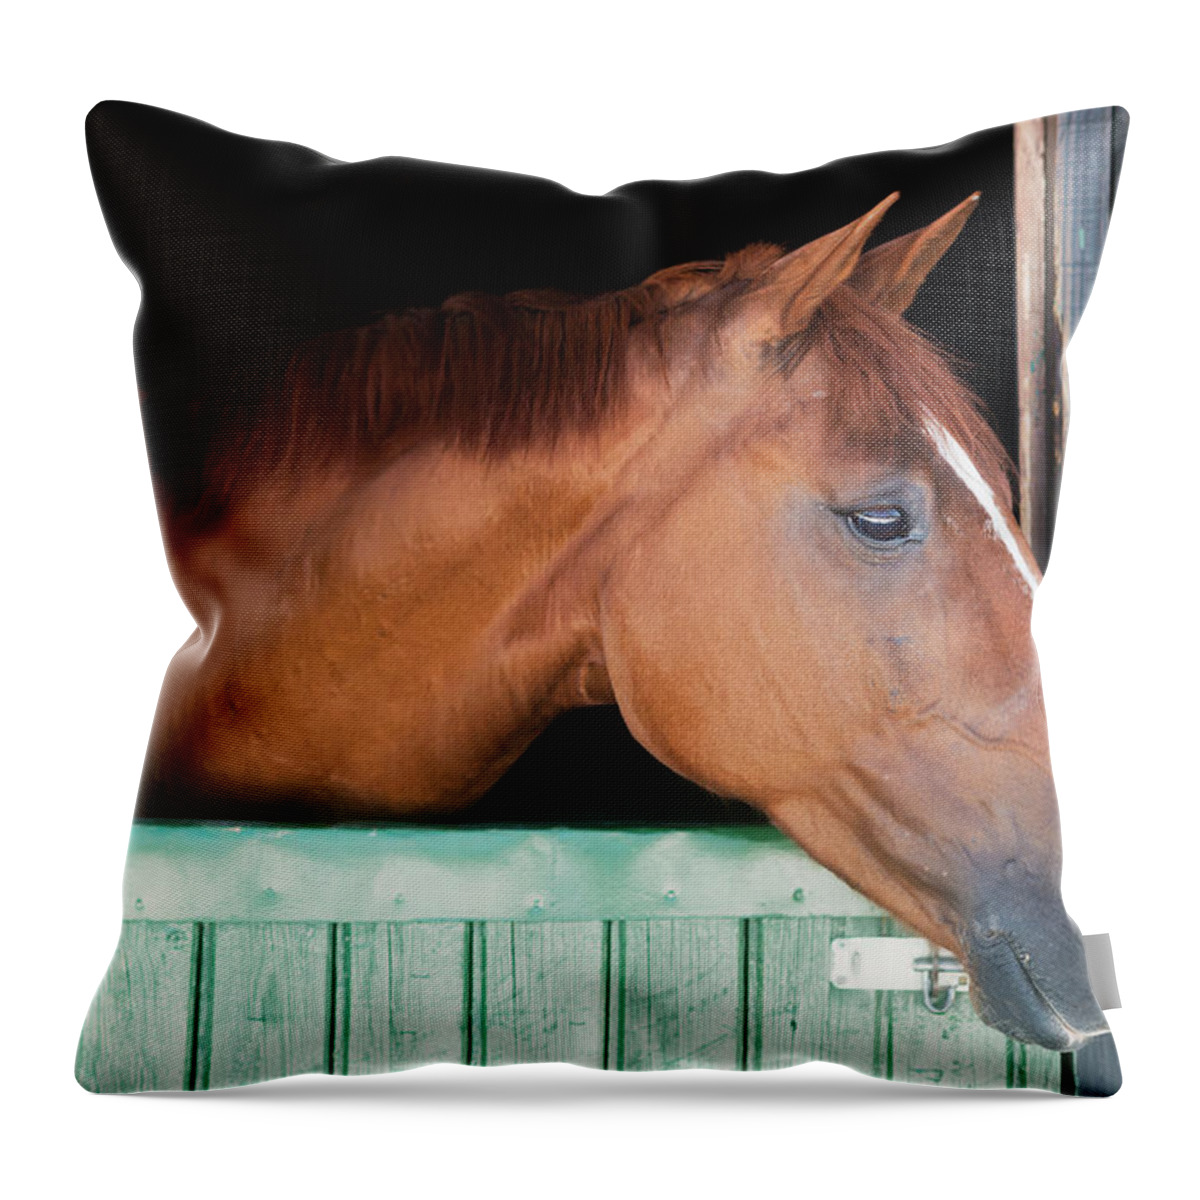 Horse Throw Pillow featuring the photograph A Horse Peeks His Head Out Of His Stall by Ben Welsh / Design Pics